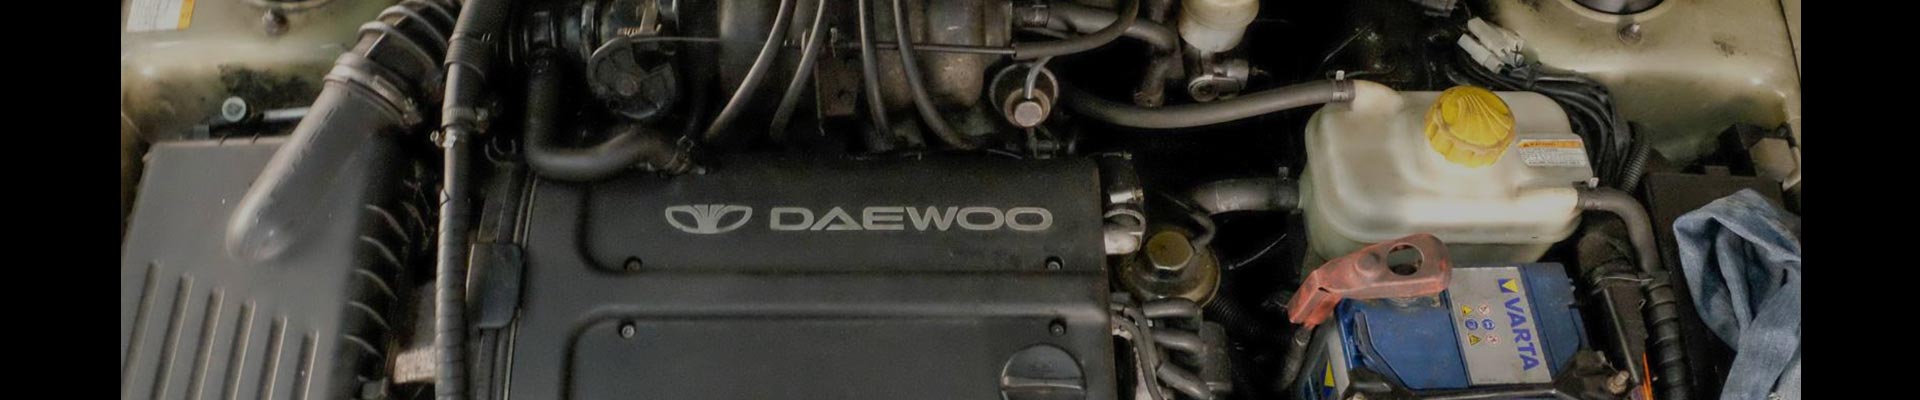 Shop Replacement 2002 Daewoo Nubira Parts with Discounted Price on the Net